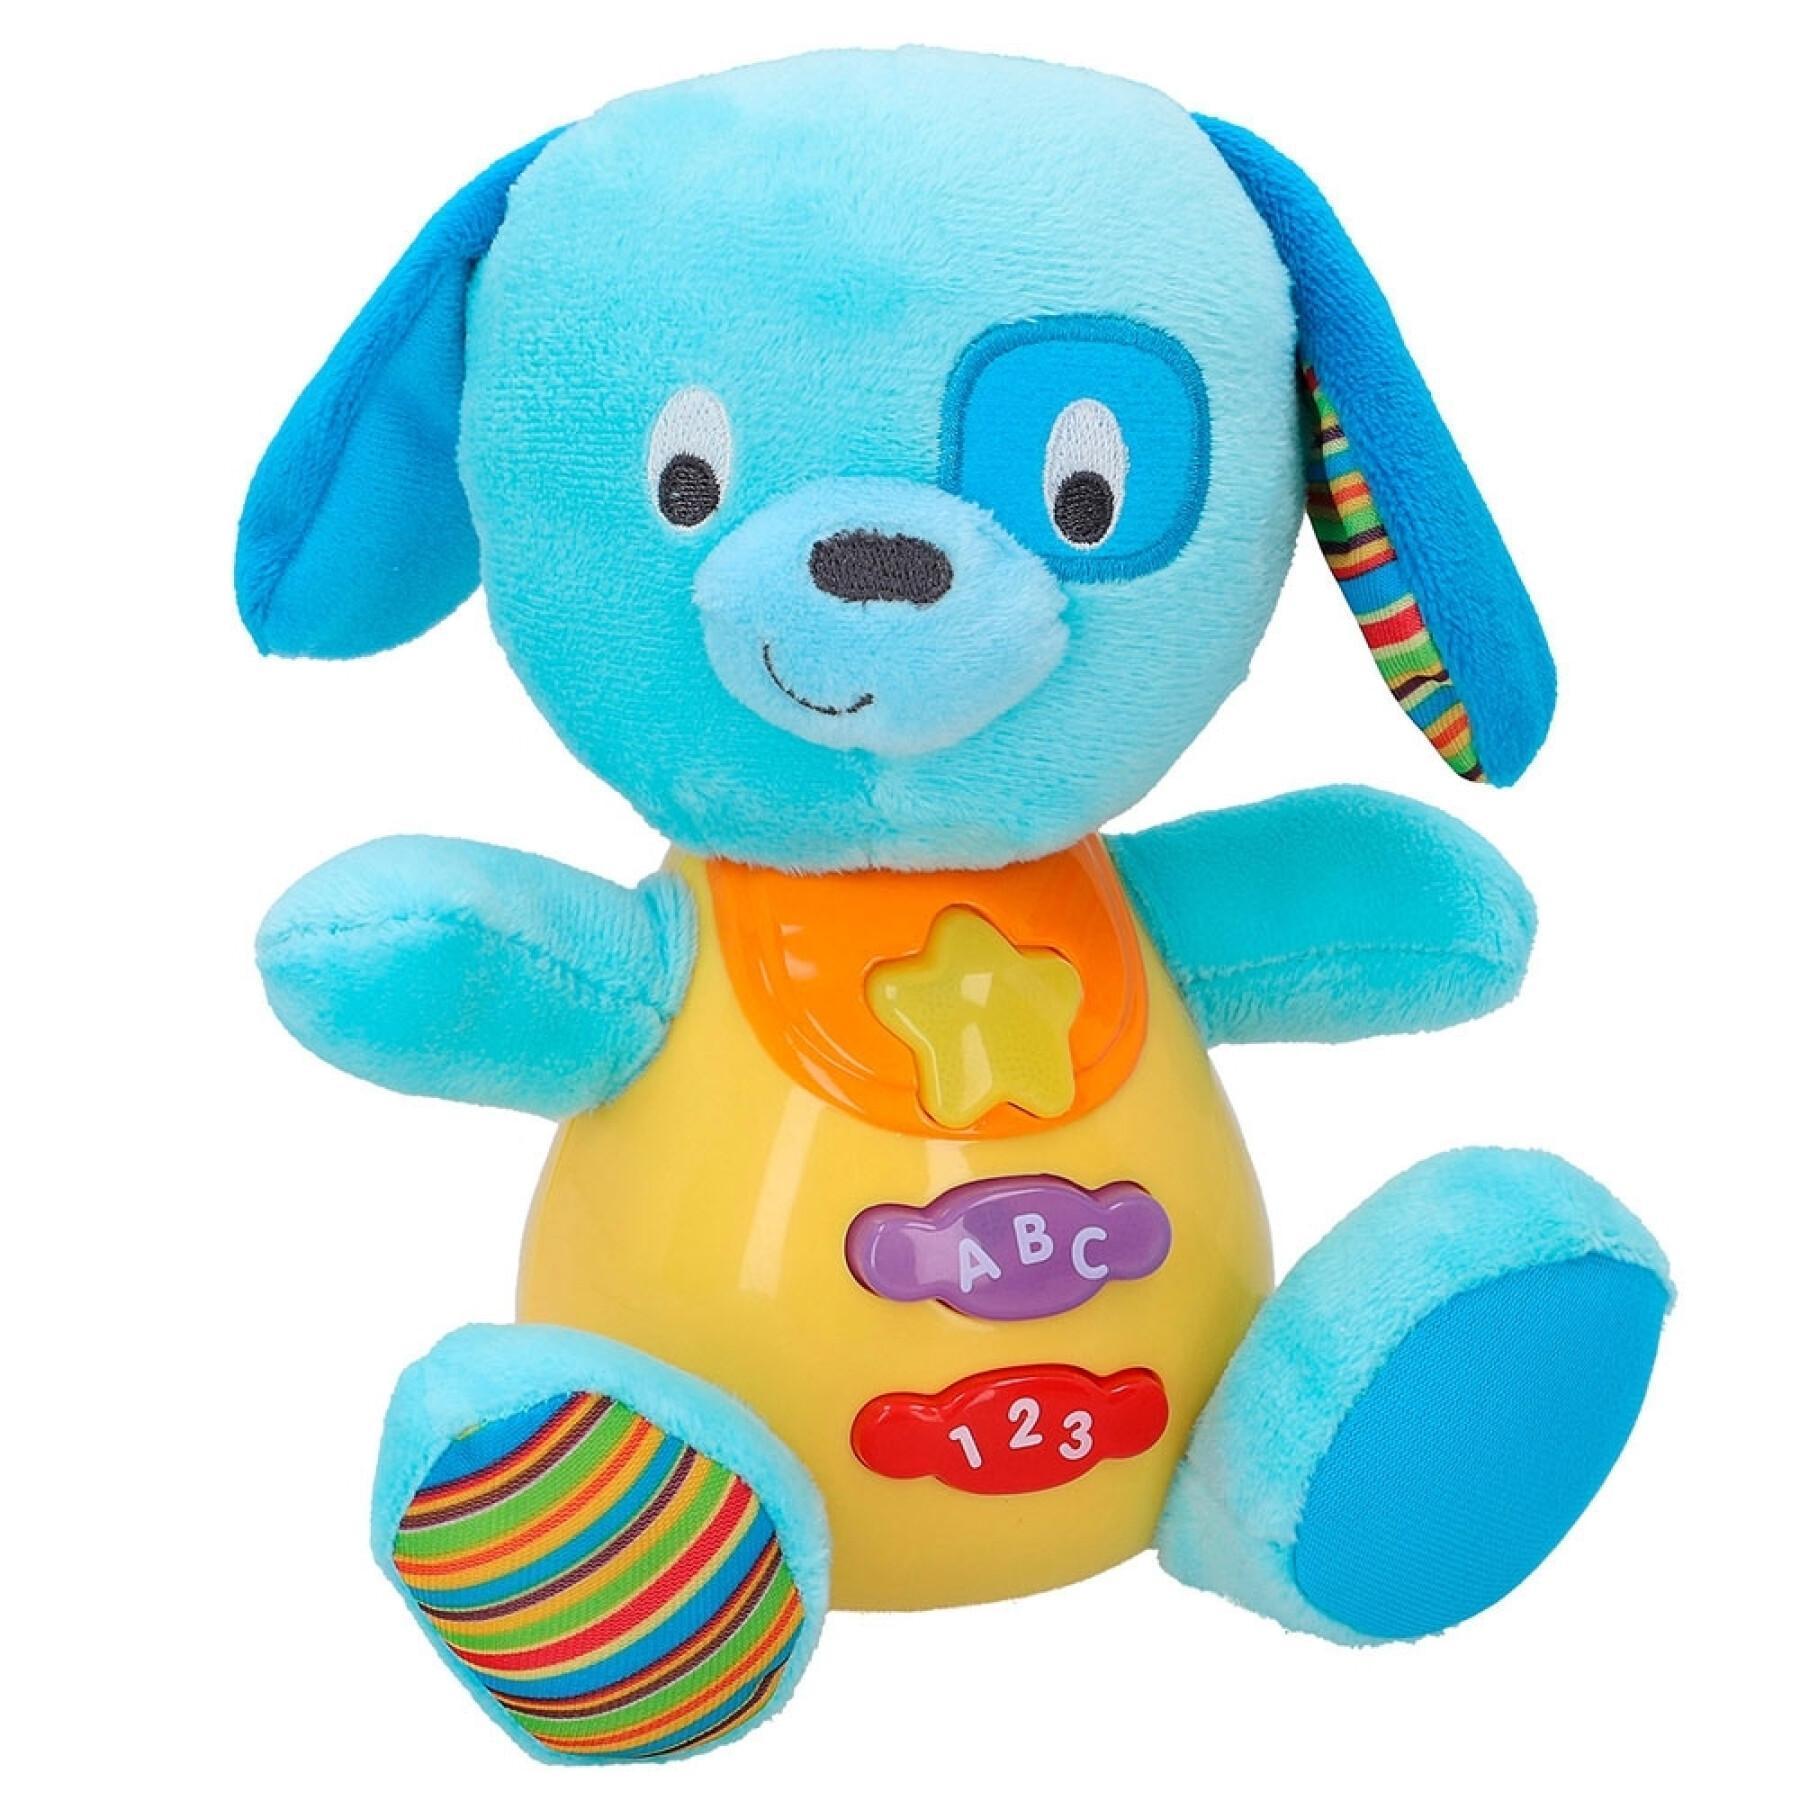 Light, sound and melody plush for puppies Winfun